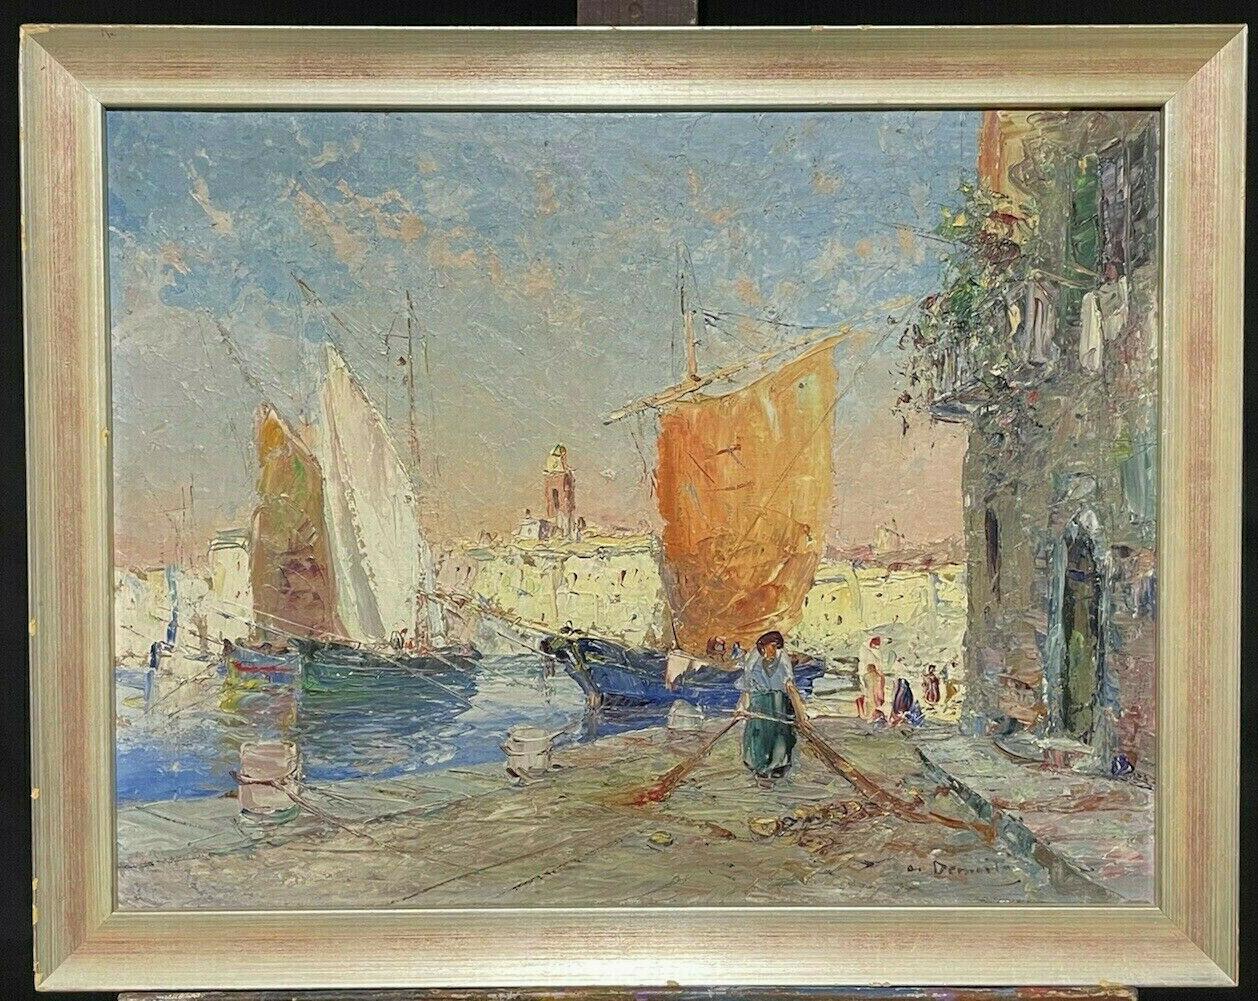 MID 20TH CENTURY FRENCH POST-IMPRESSIONIST OIL - ST. TROPEZ HARBOUR OLD TOWN